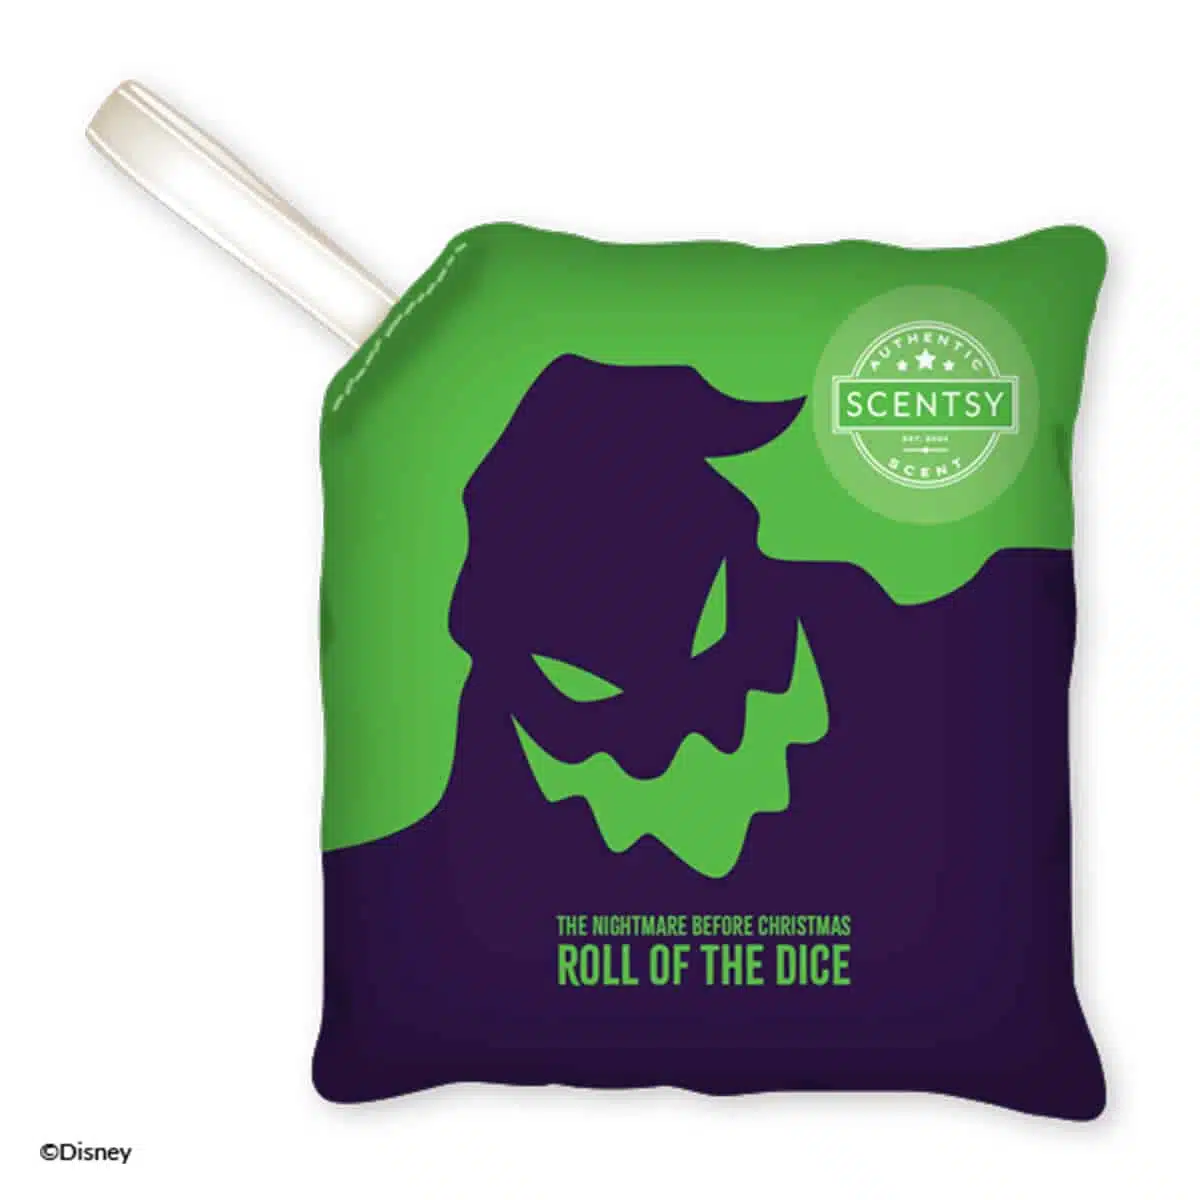 The Nightmare Before Christmas: Roll of the Dice - Scentsy Scent Pak